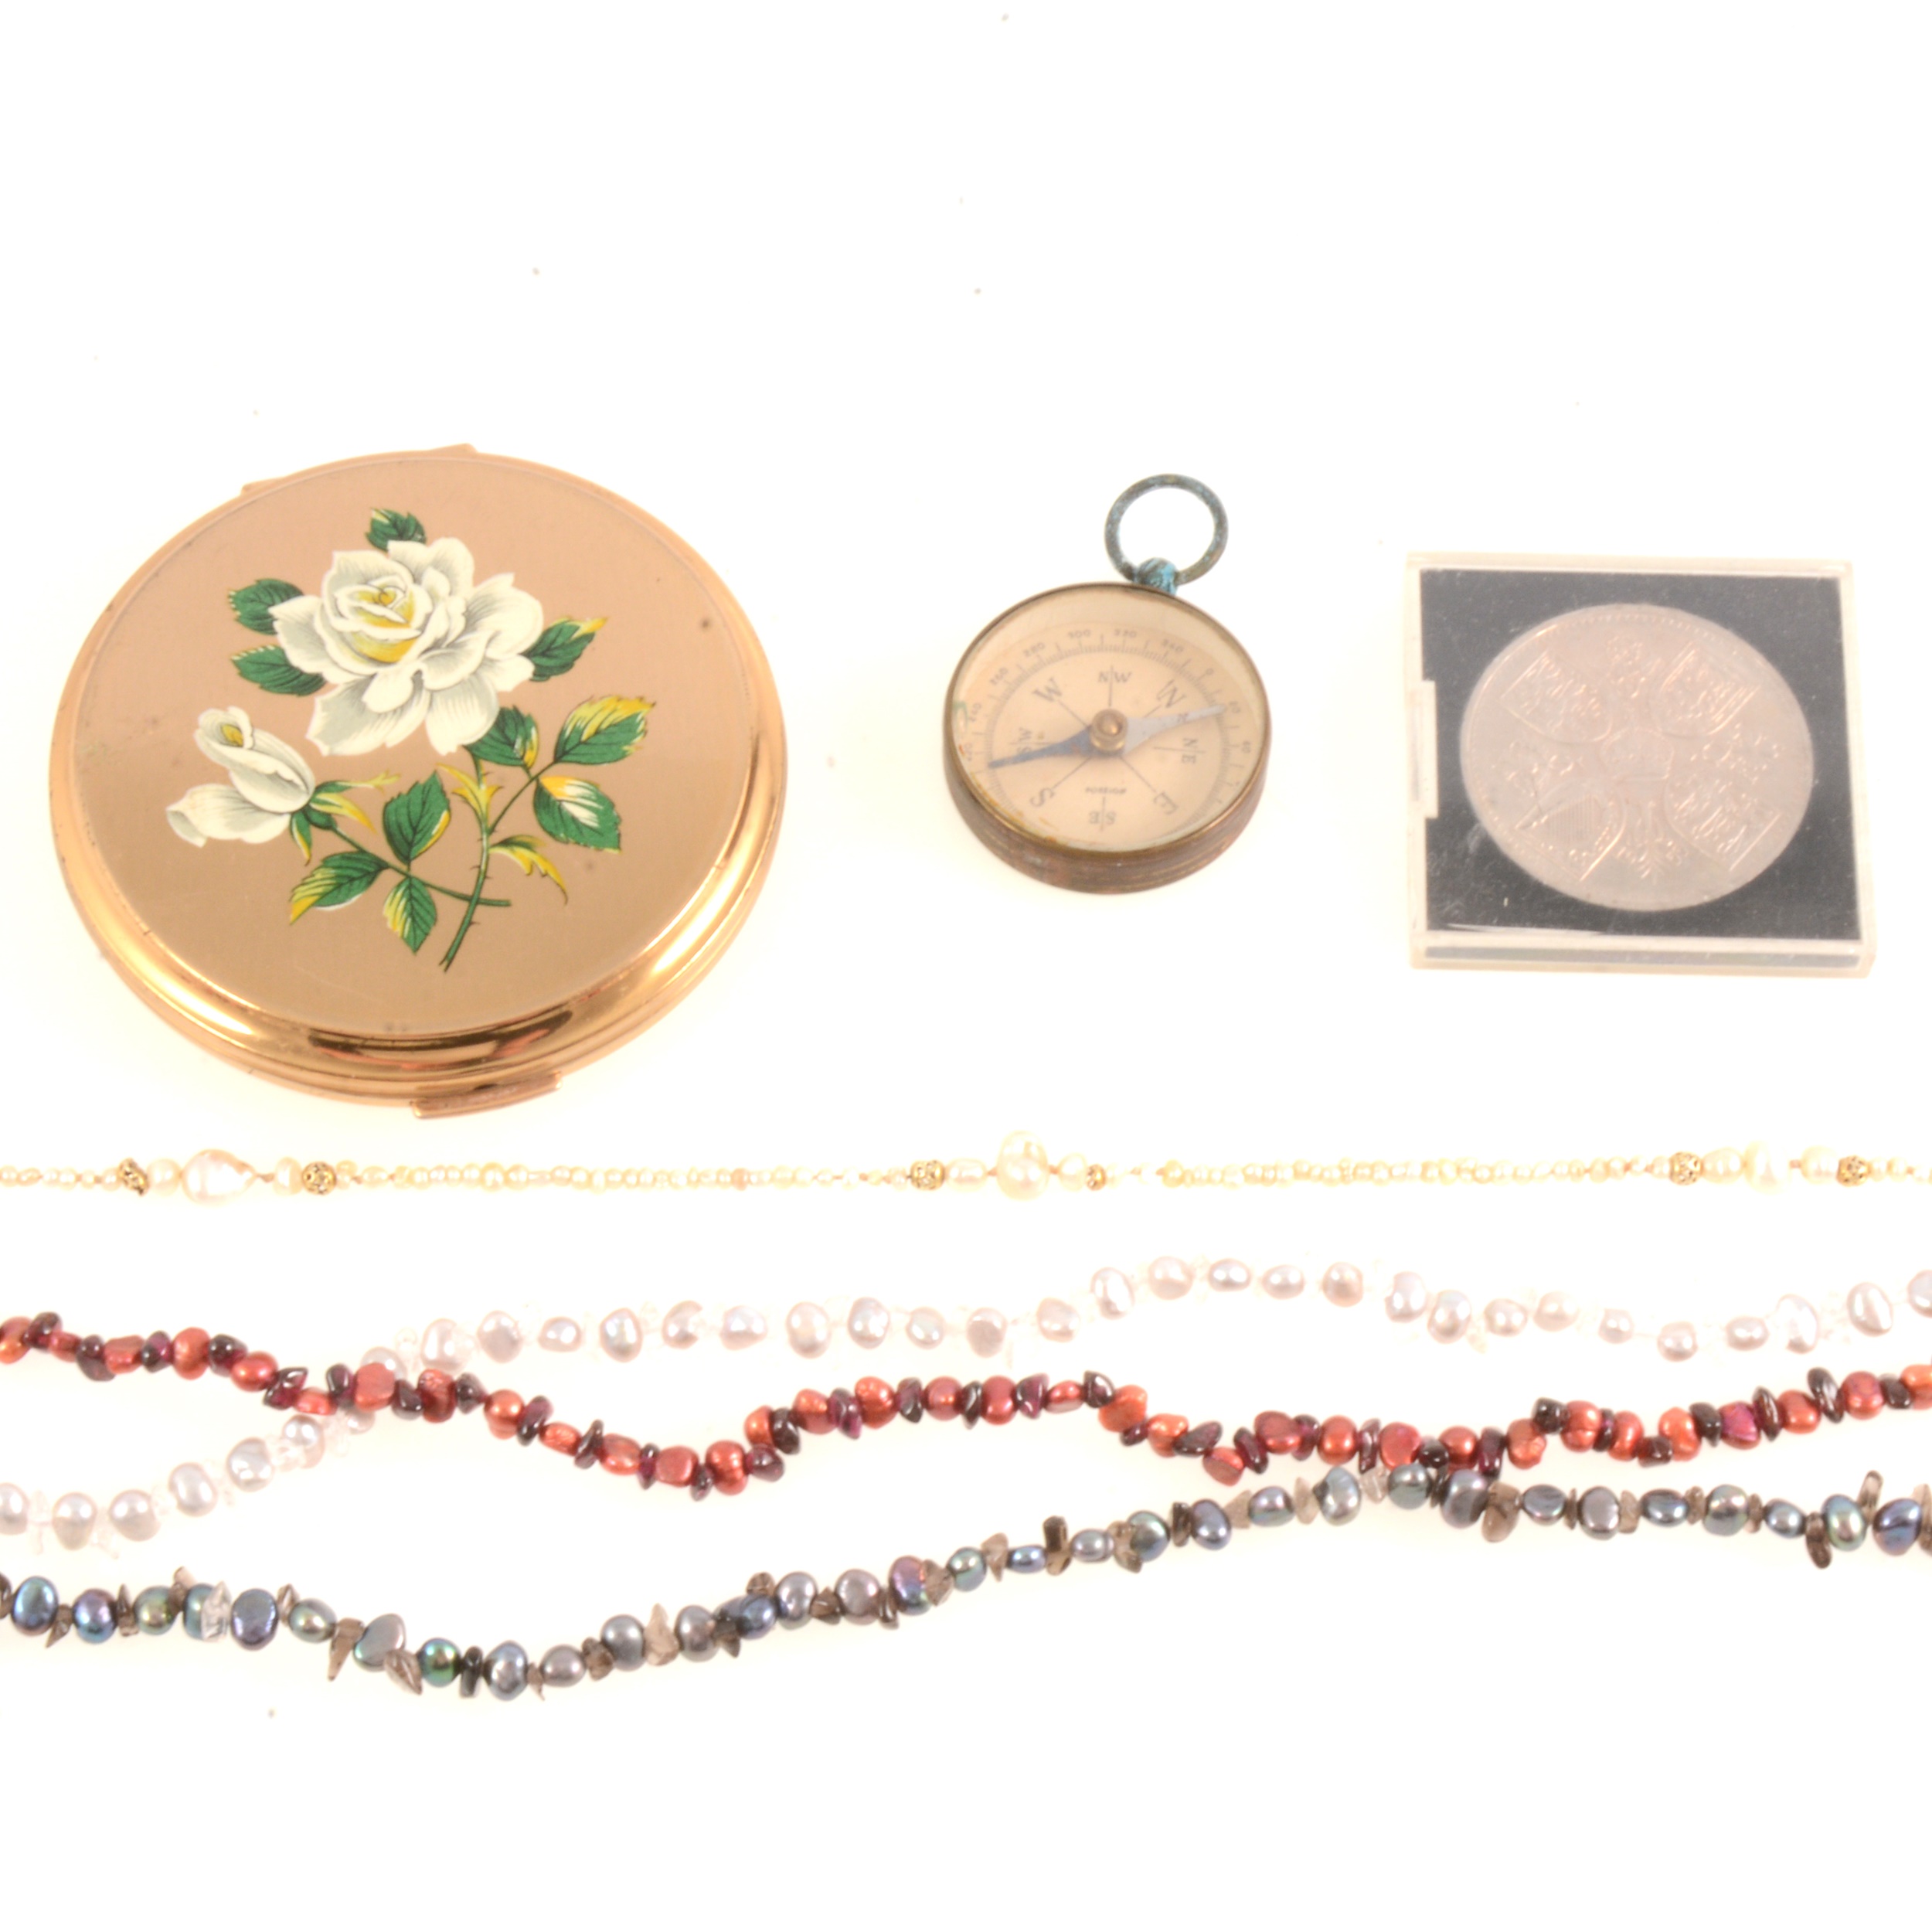 Pearl necklaces, powder compact, compass, Coronation Crown